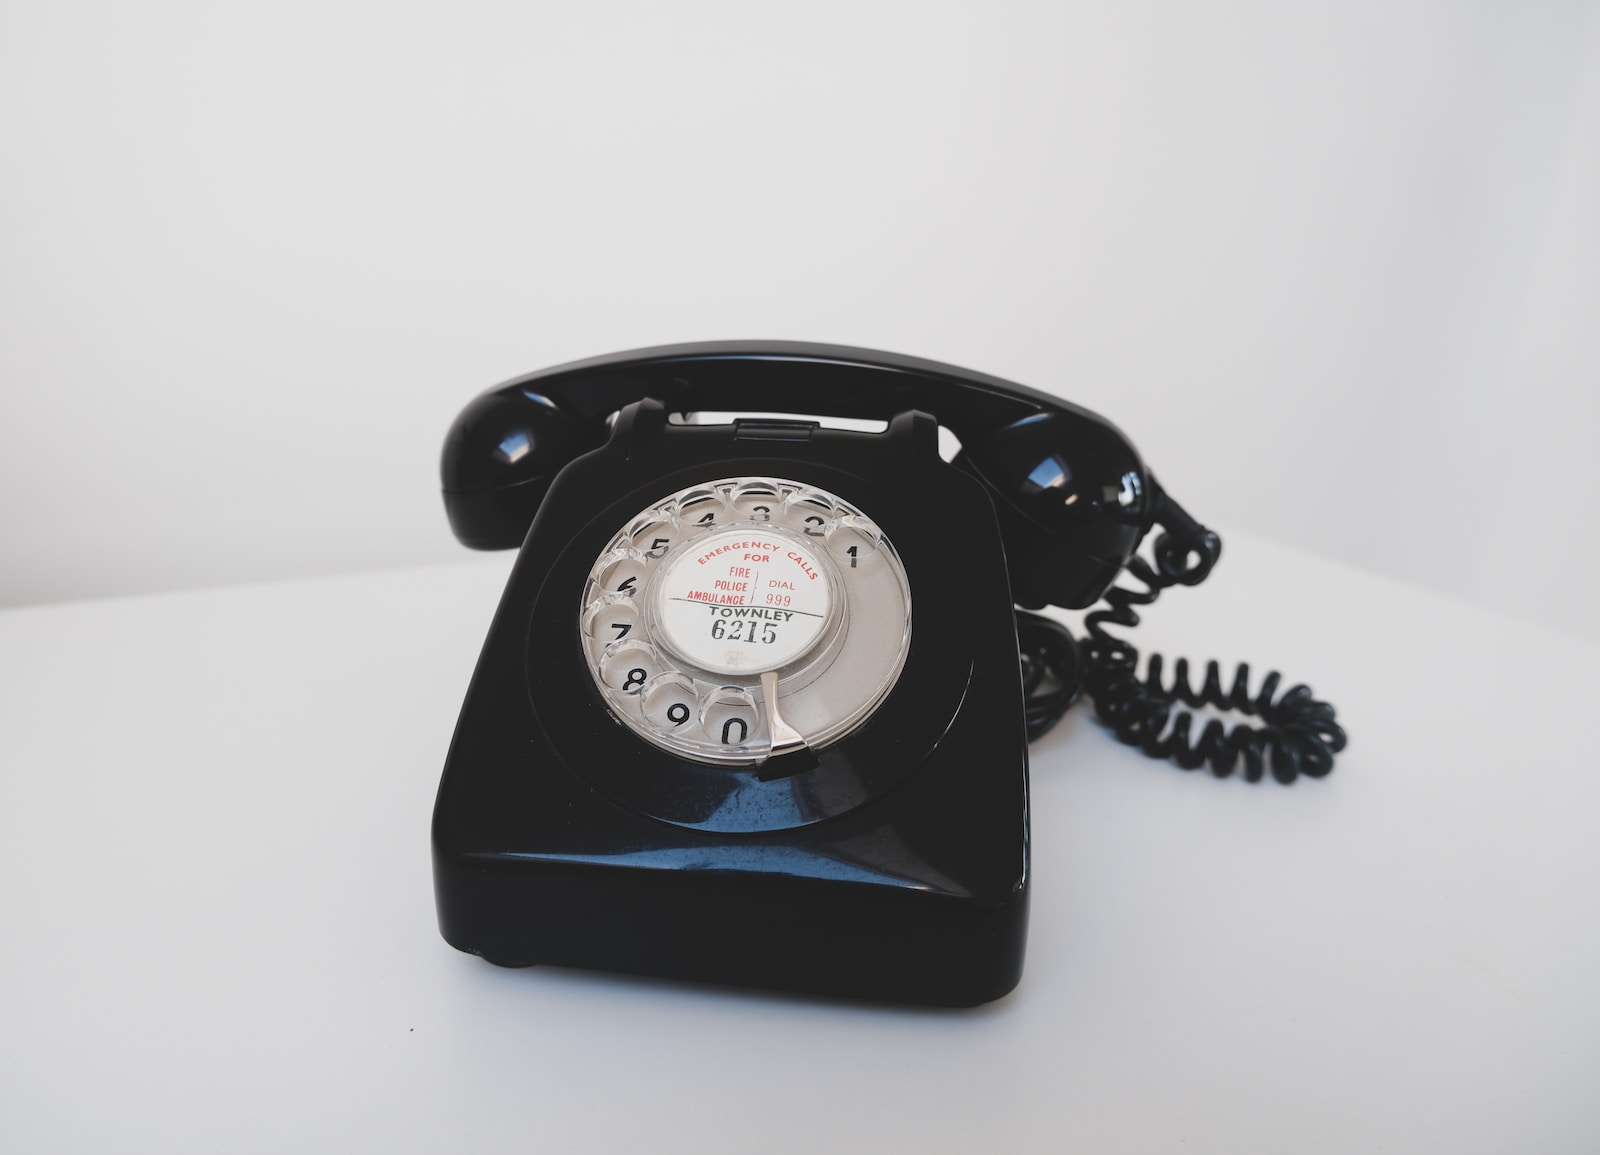 Prevalent in the 60s and 70s, black rotary phone on white surface